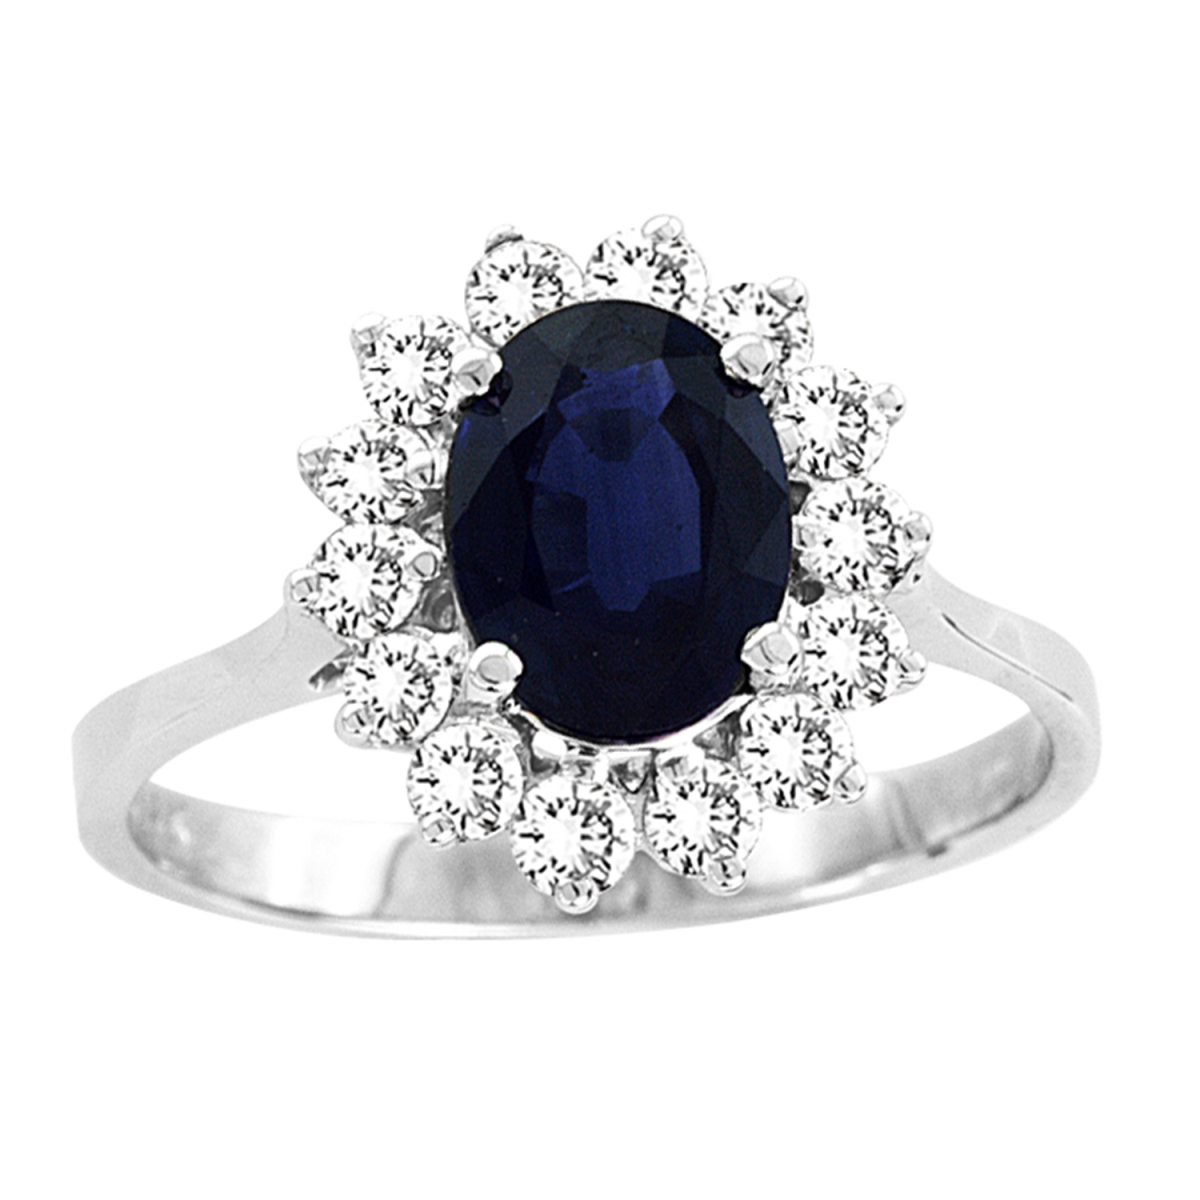 Picture of Louis Creations R1548SD-4.5 14K Gold Royal Collection 1.75 CTTW 8 x 6 mm 1.35 Carat Oval Sapphire Center Stone Natural Sapphire & Diamond Ring - Size 4.5